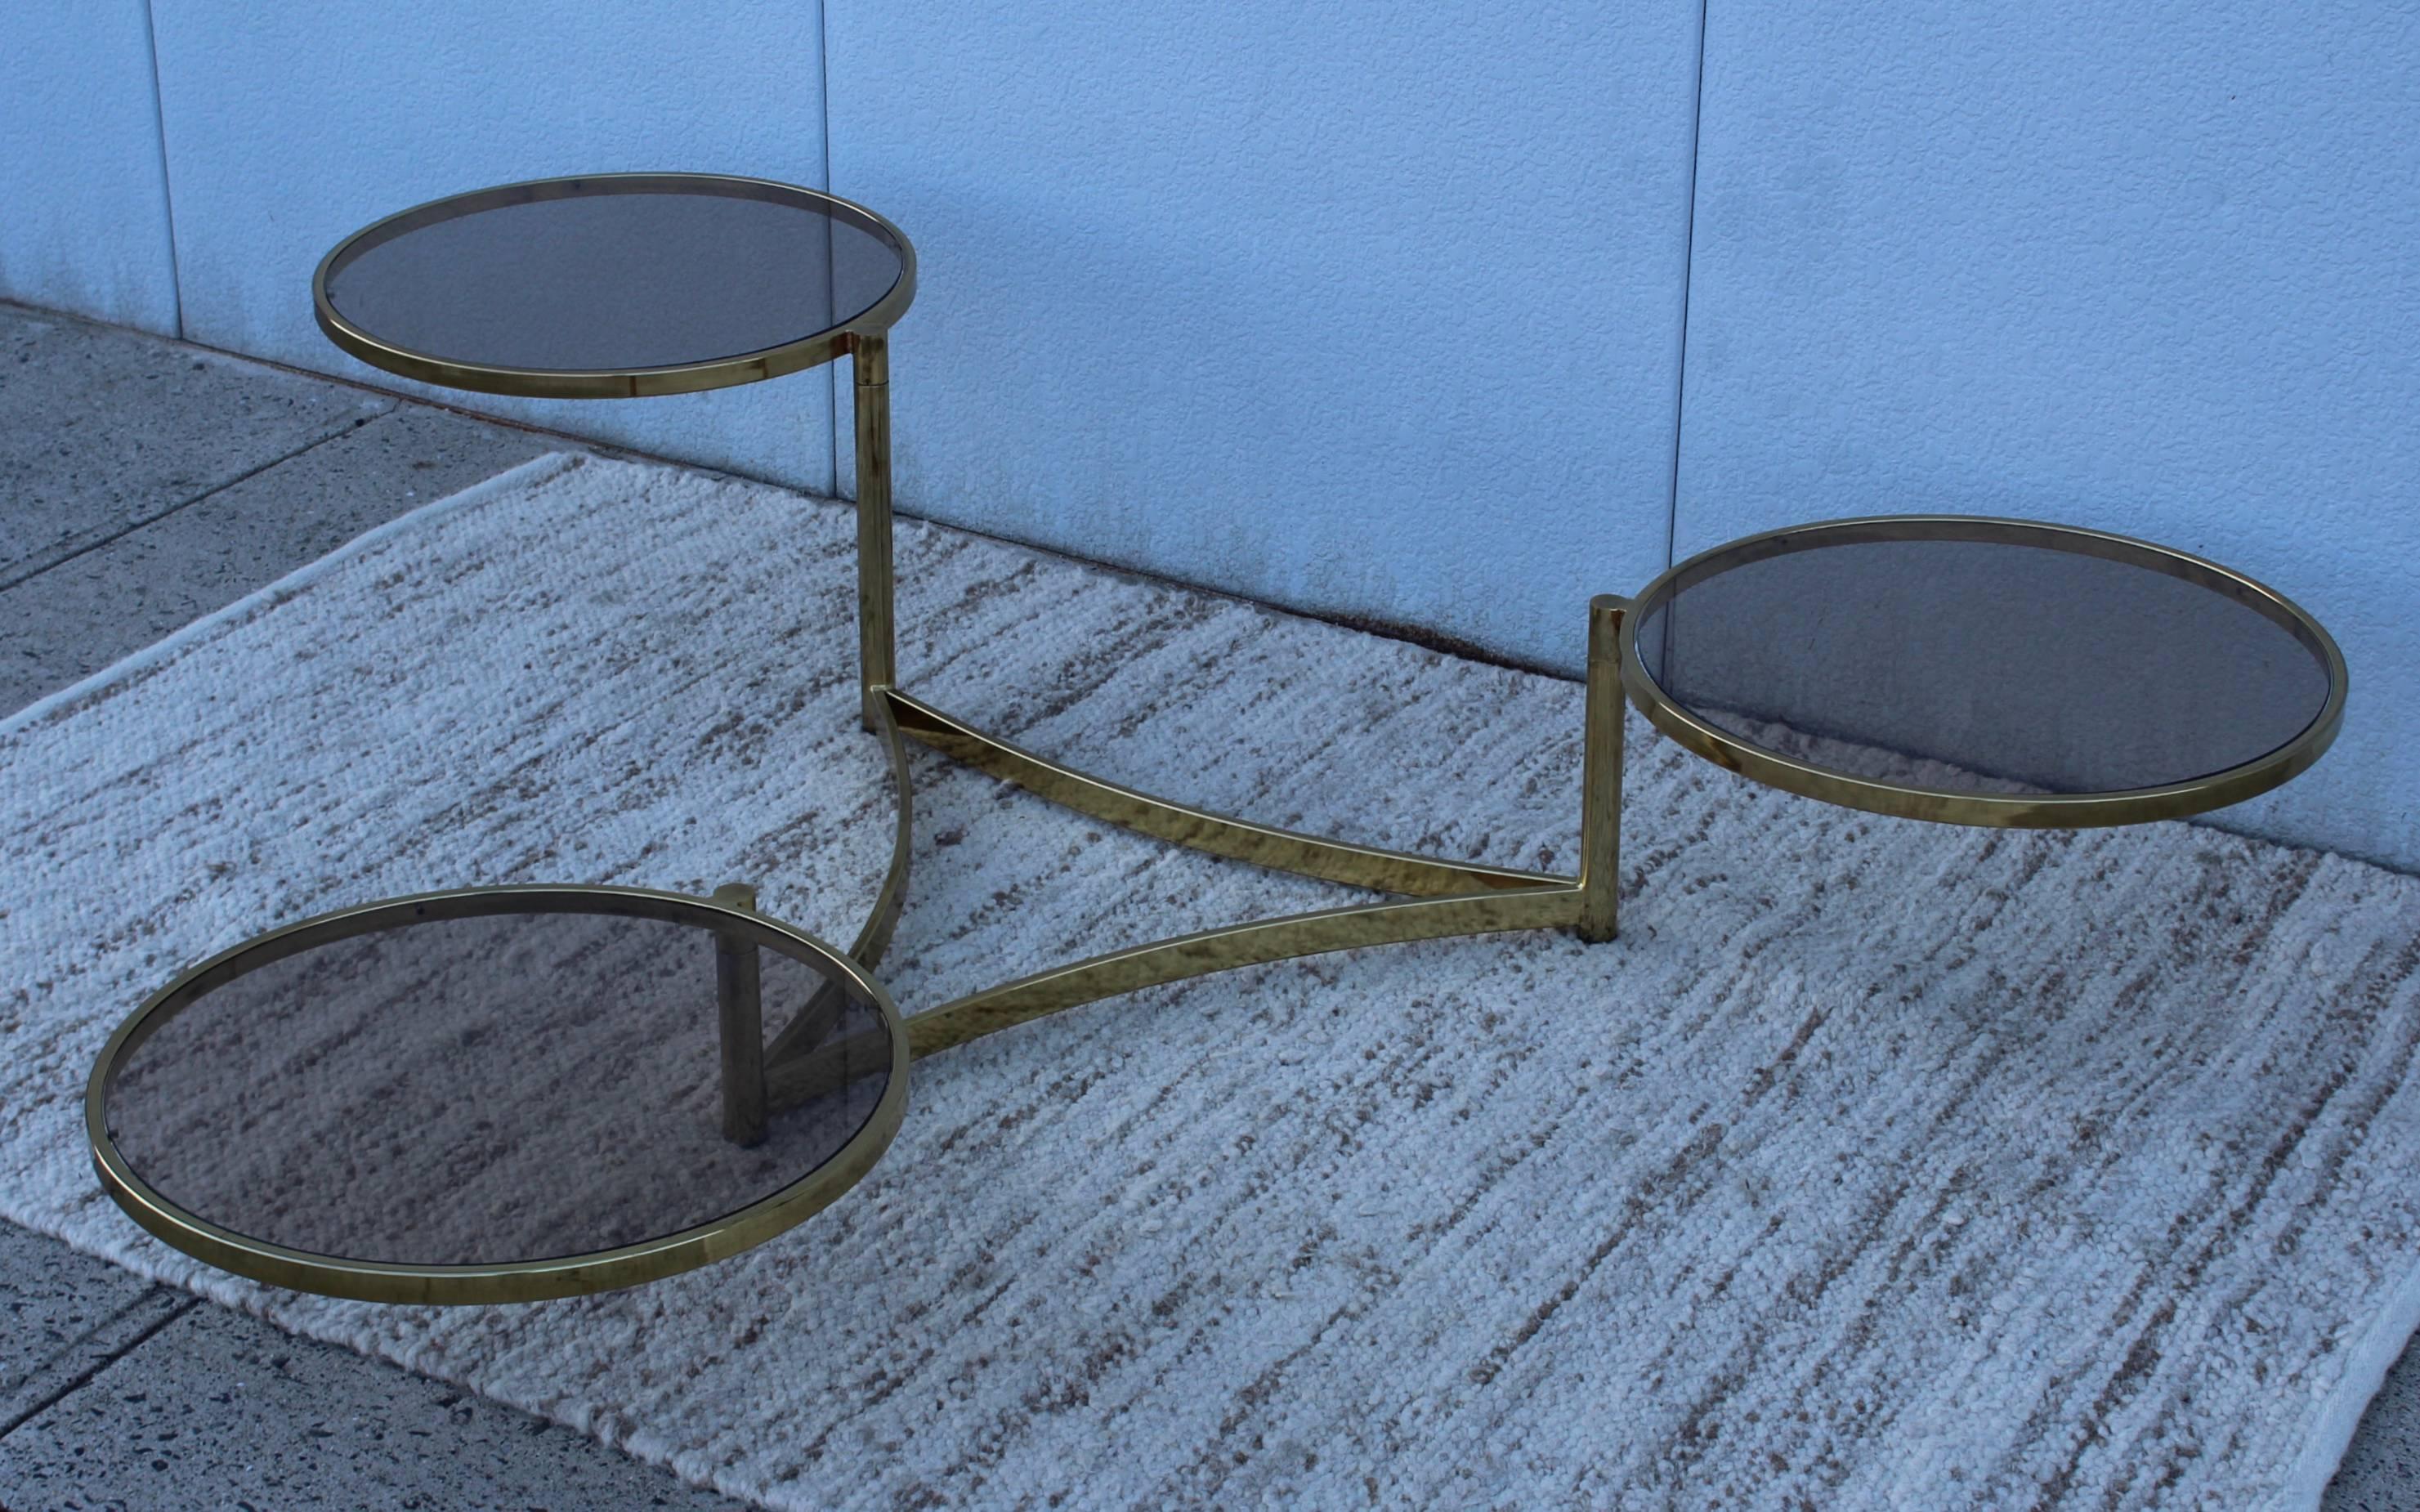 Stunning 1970s modern Italian brass plated coffee table.
Extend to 81'' when fully open.

Measures: Each level height is 17'' 13'' 9''.